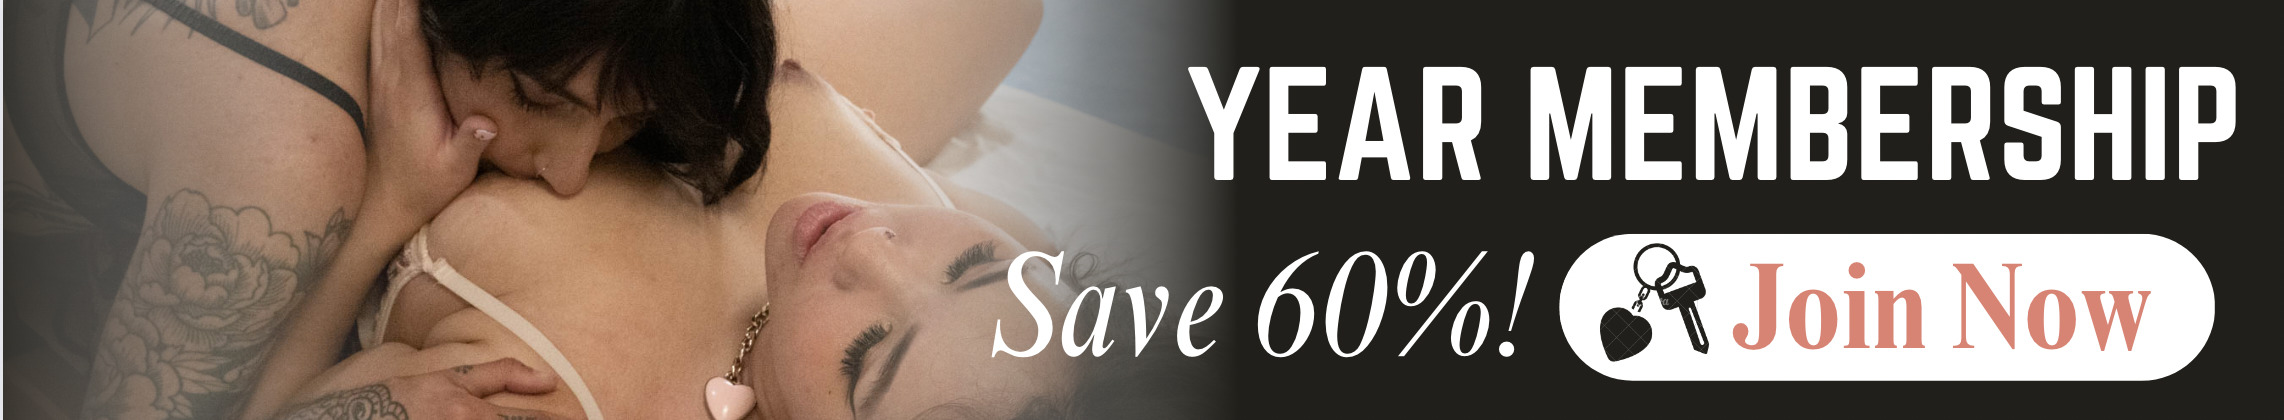 Year Membership - Join Now - Save over 60%